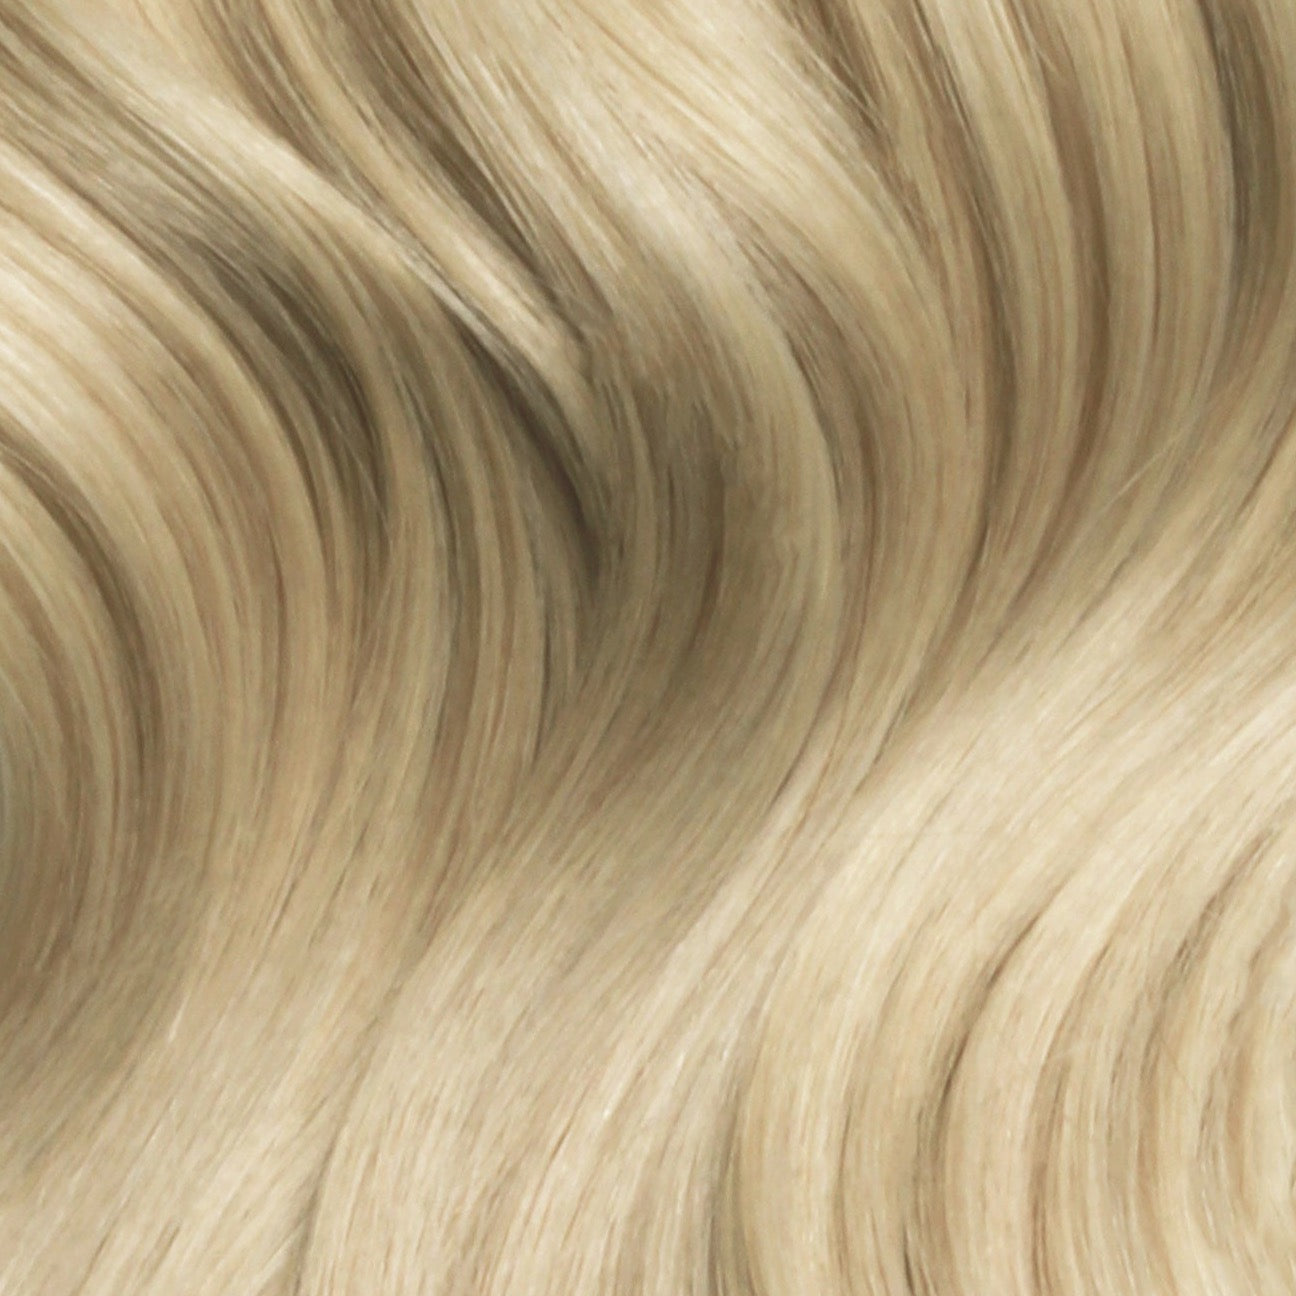 Flat Tip Bonds 22 Inches - SWAY Hair Extensions Silver-Ash-Blonde-60A-Silver SWAY Flat Tip Bonds, 22&quot;- 100% Remy Human Hair Extensions with Italian Keratin. Perfect for hair goals.